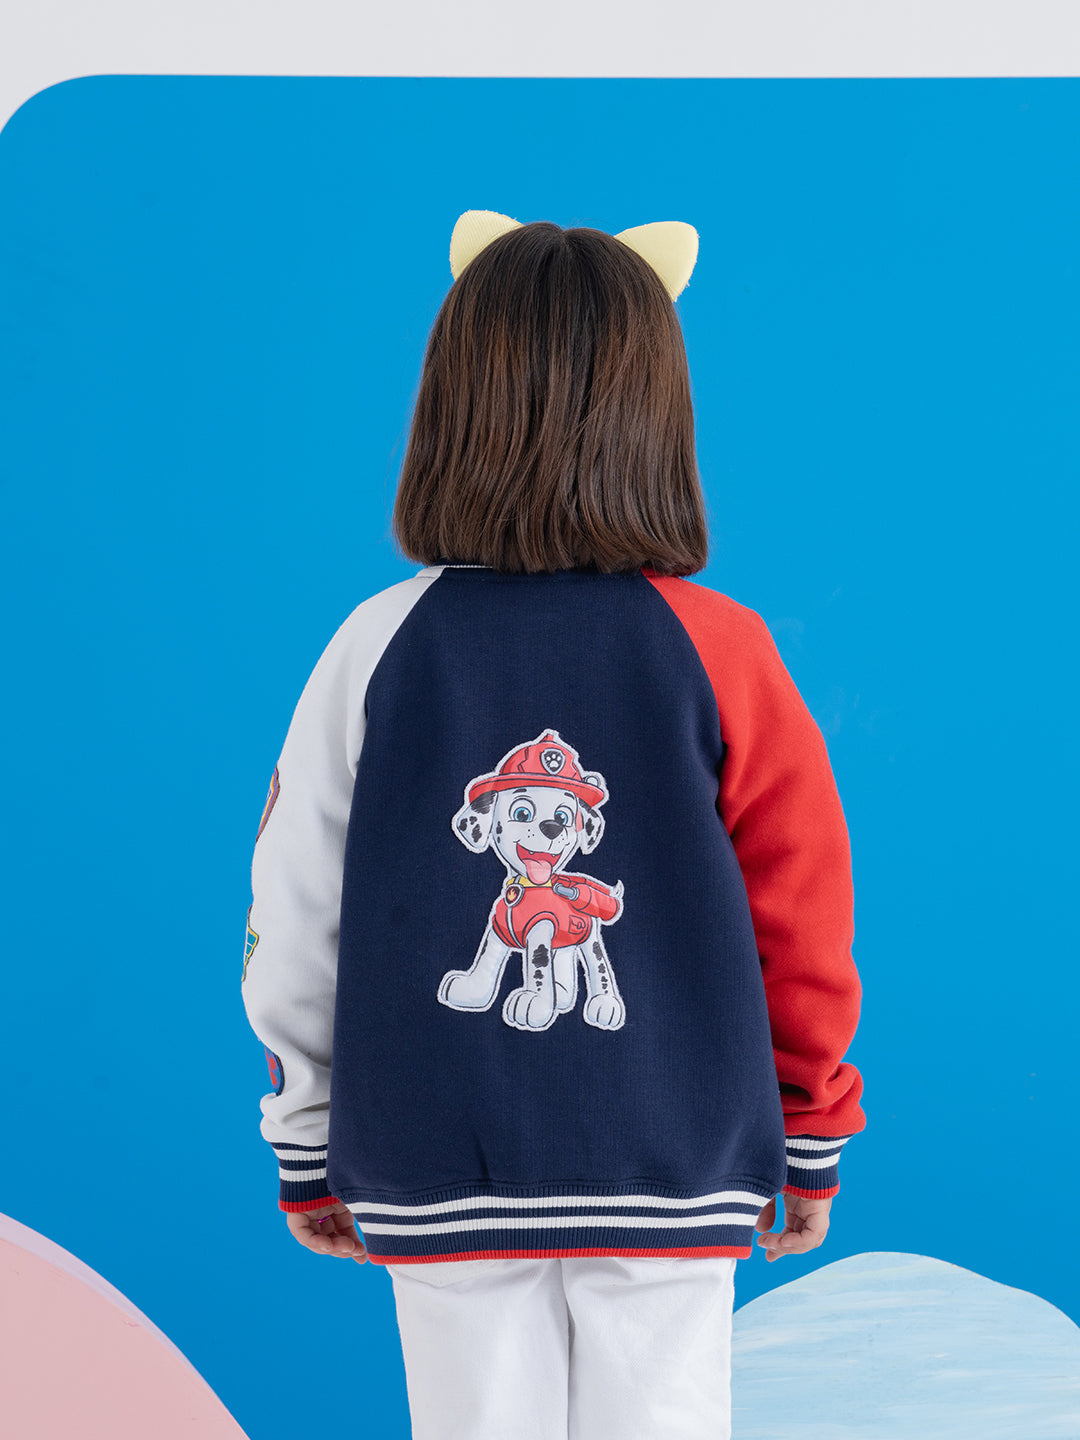 Red& Black Unisex Paw Patrol Jackets With 3D Badge